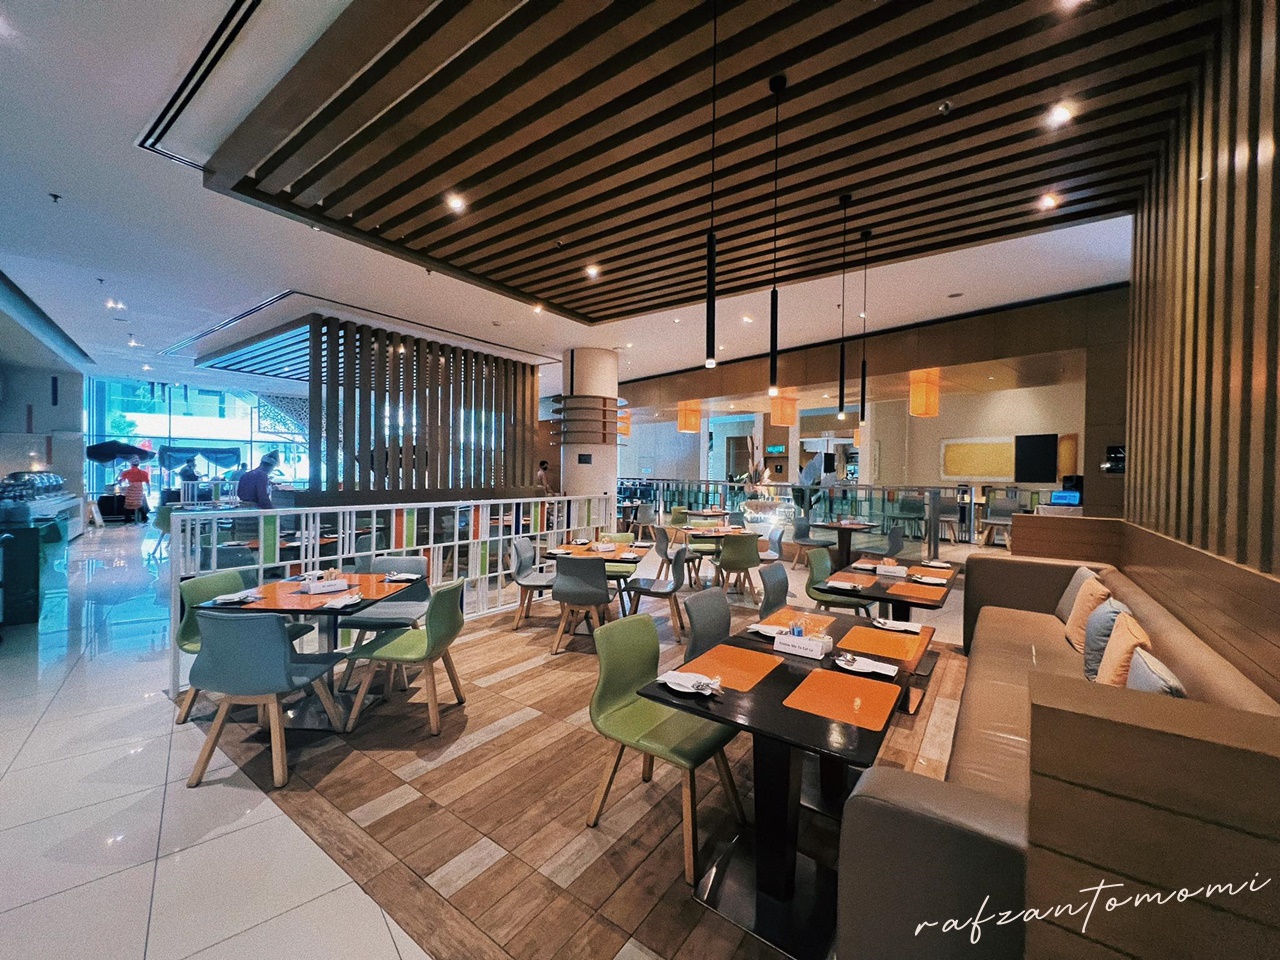 Bufet Ramadan 2022 - The Eatery Restaurant, Four Points by Sheraton Puchong